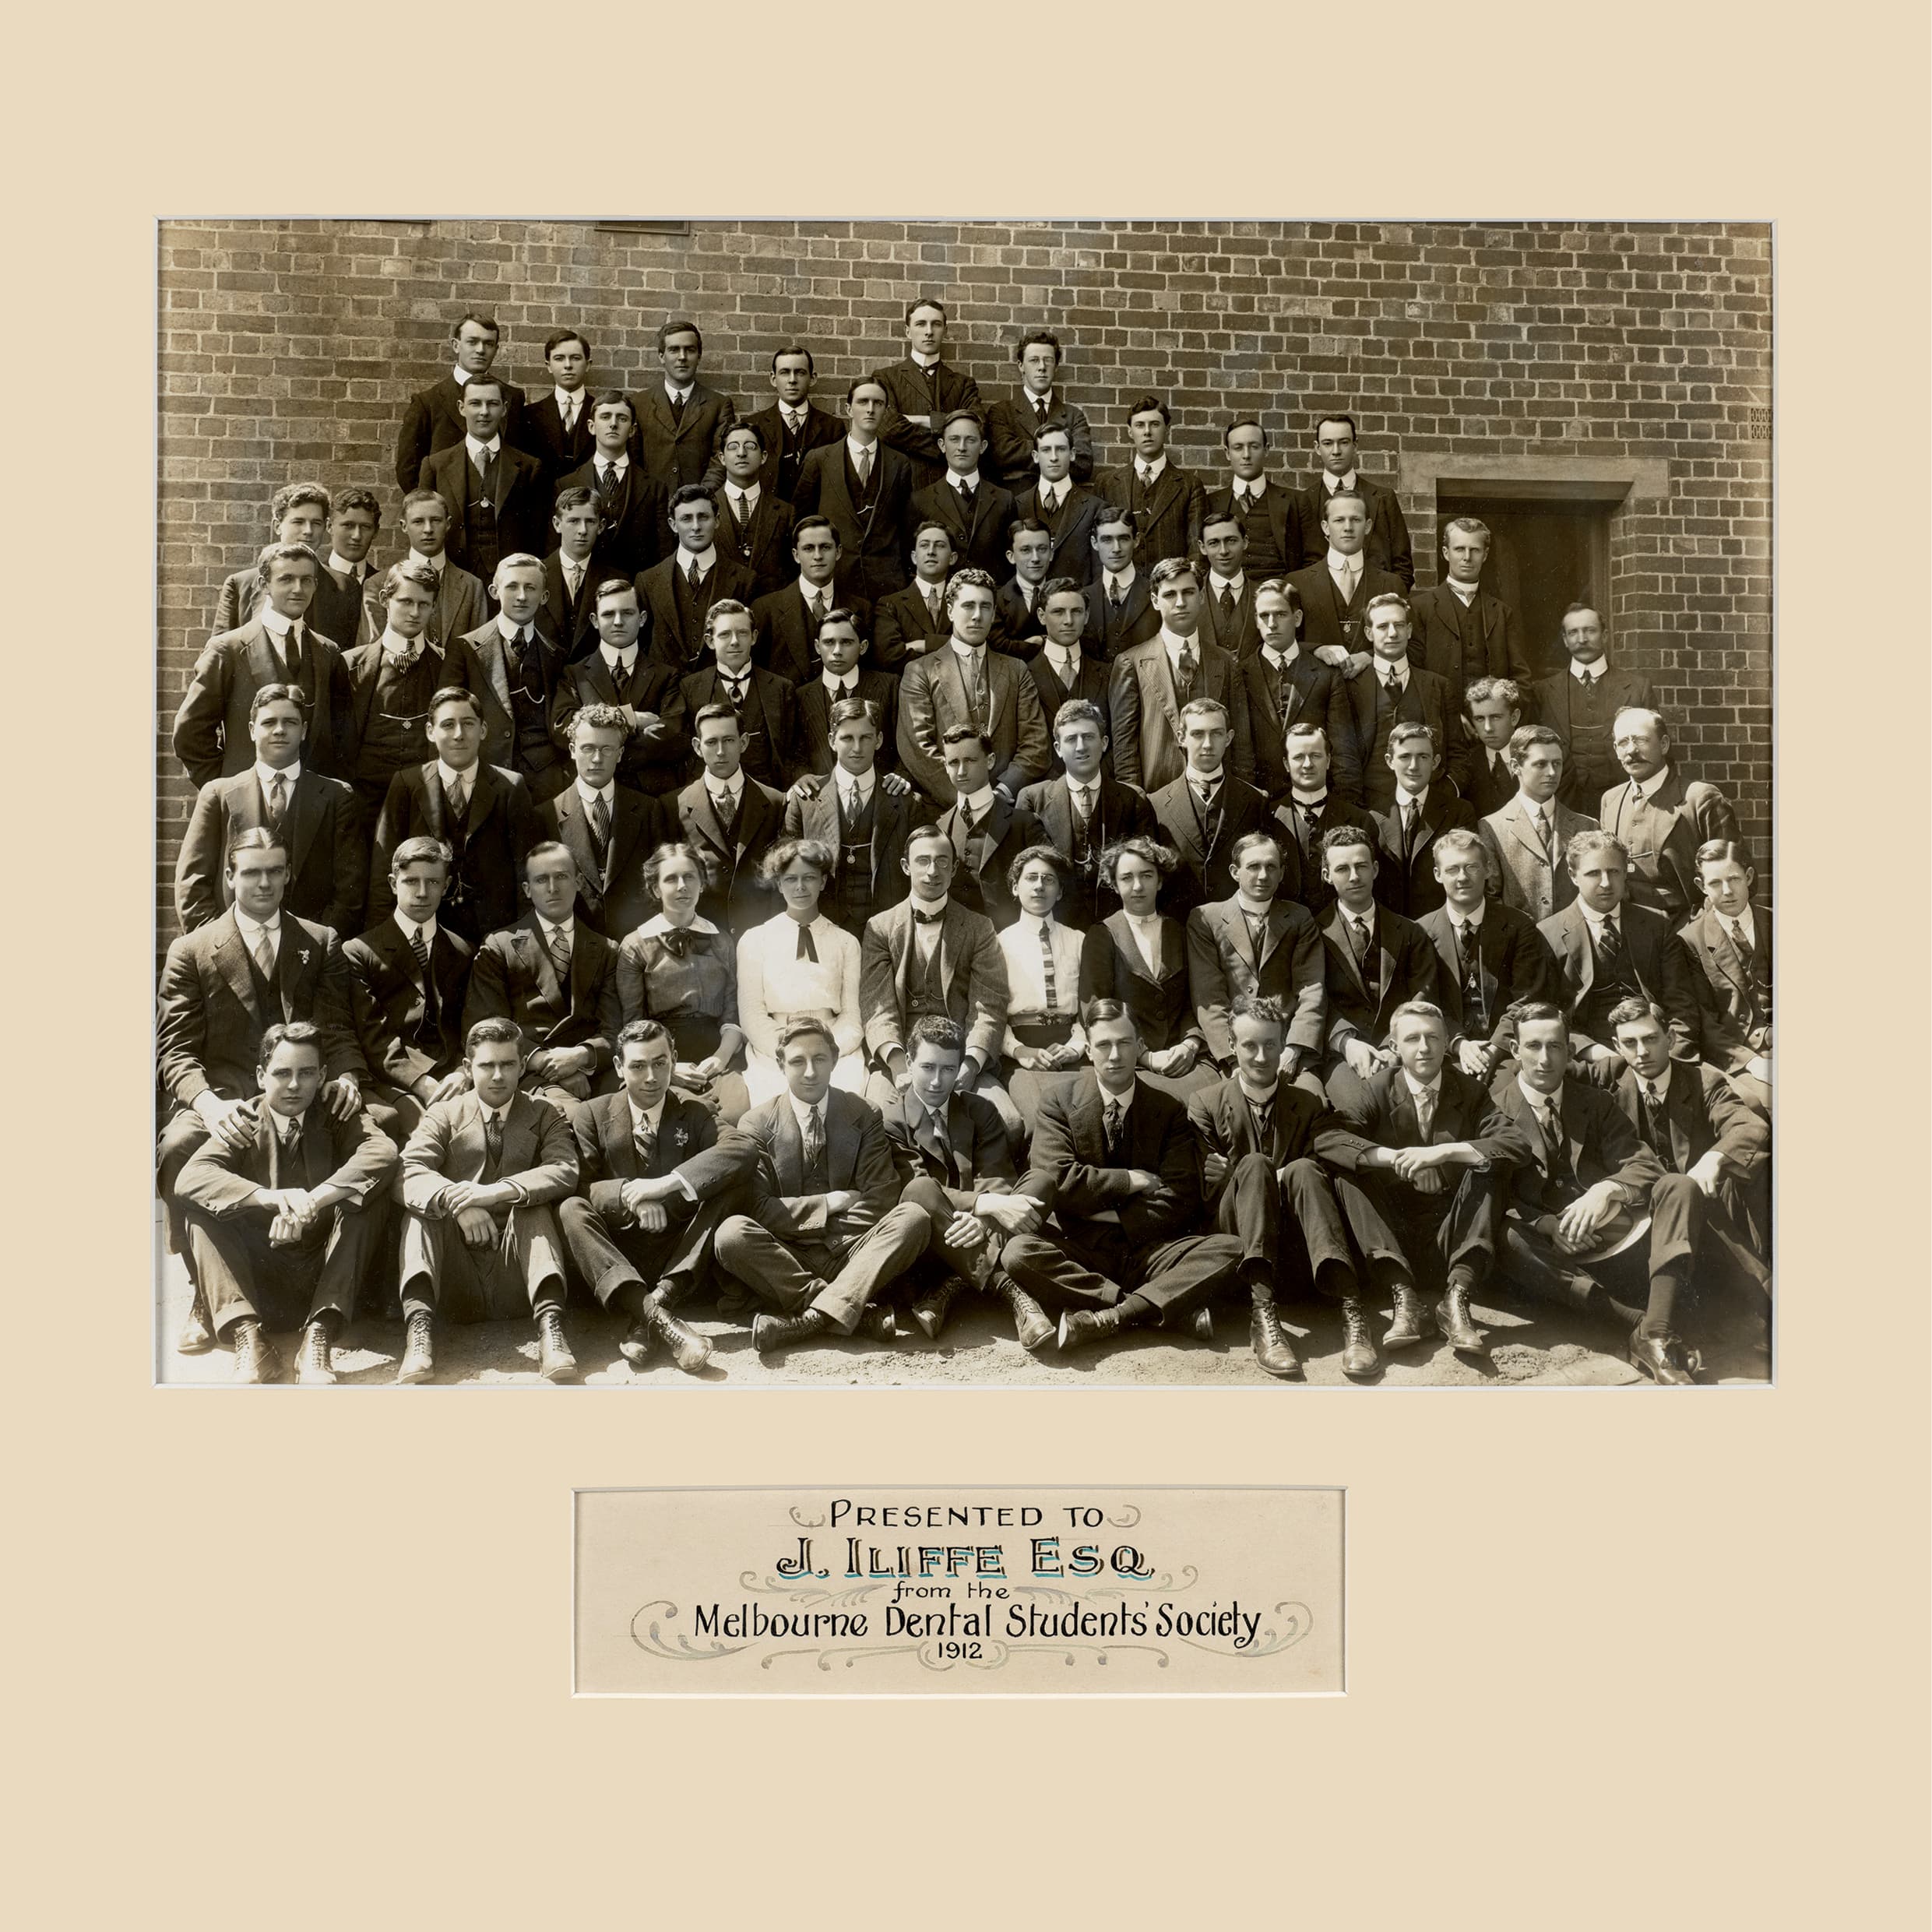 Presented to J. Iliffe Esq. from the Melbourne Dental Students’ Society, 1912, photograph, 45.5 × 57.5 cm. HFADM 3128, Henry Forman Atkinson Dental Museum, University of Melbourne